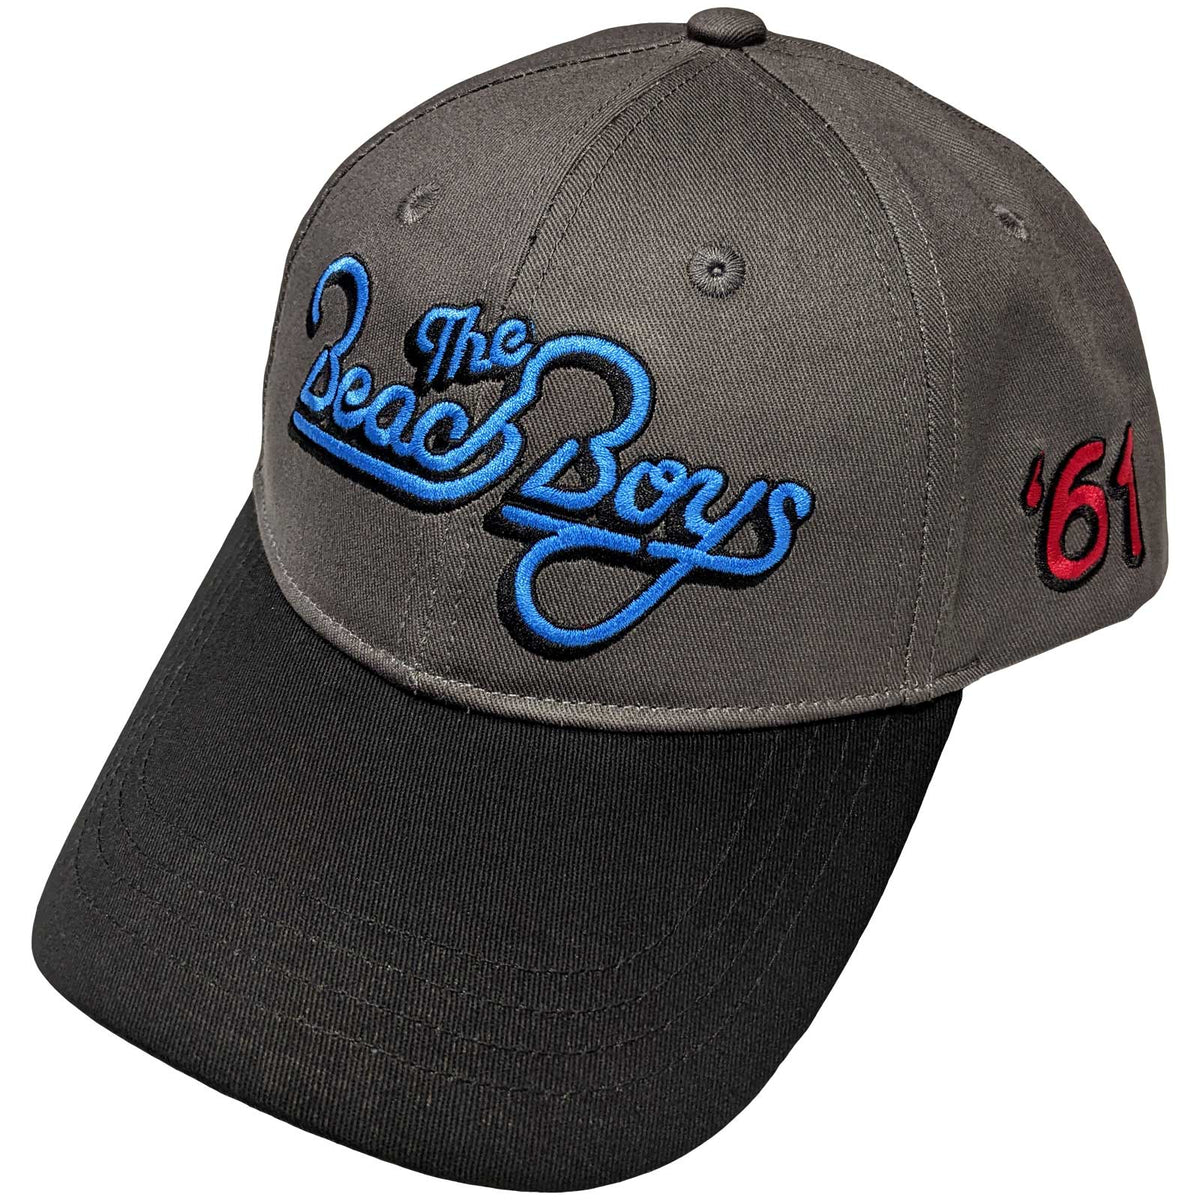 The Beach Boys Unisex Baseball Cap - Official Licensed Product